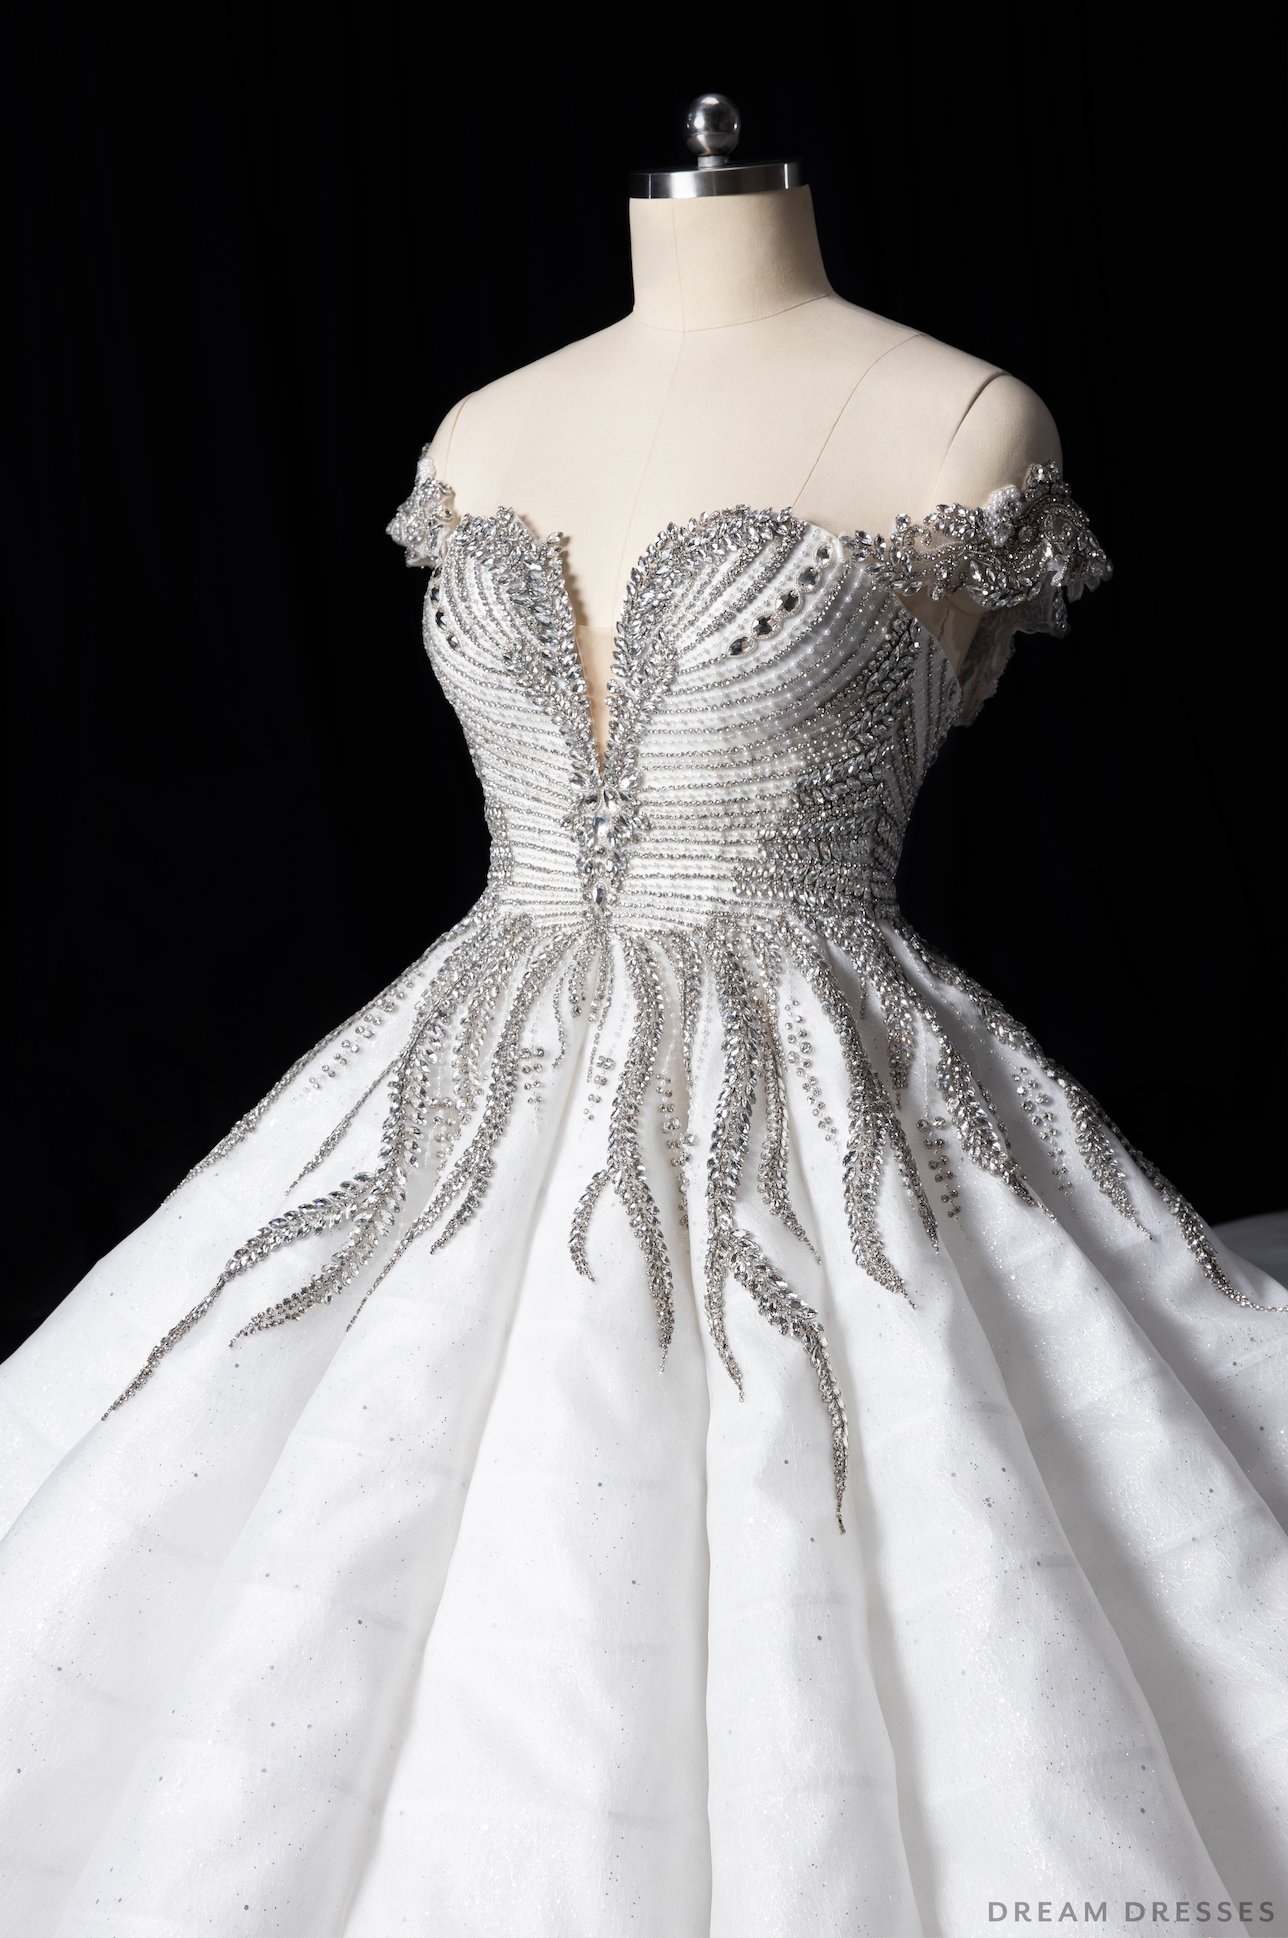 Haute Couture Ball Gown Wedding Dress with Swarovski Crystals (#SHARMAINE)